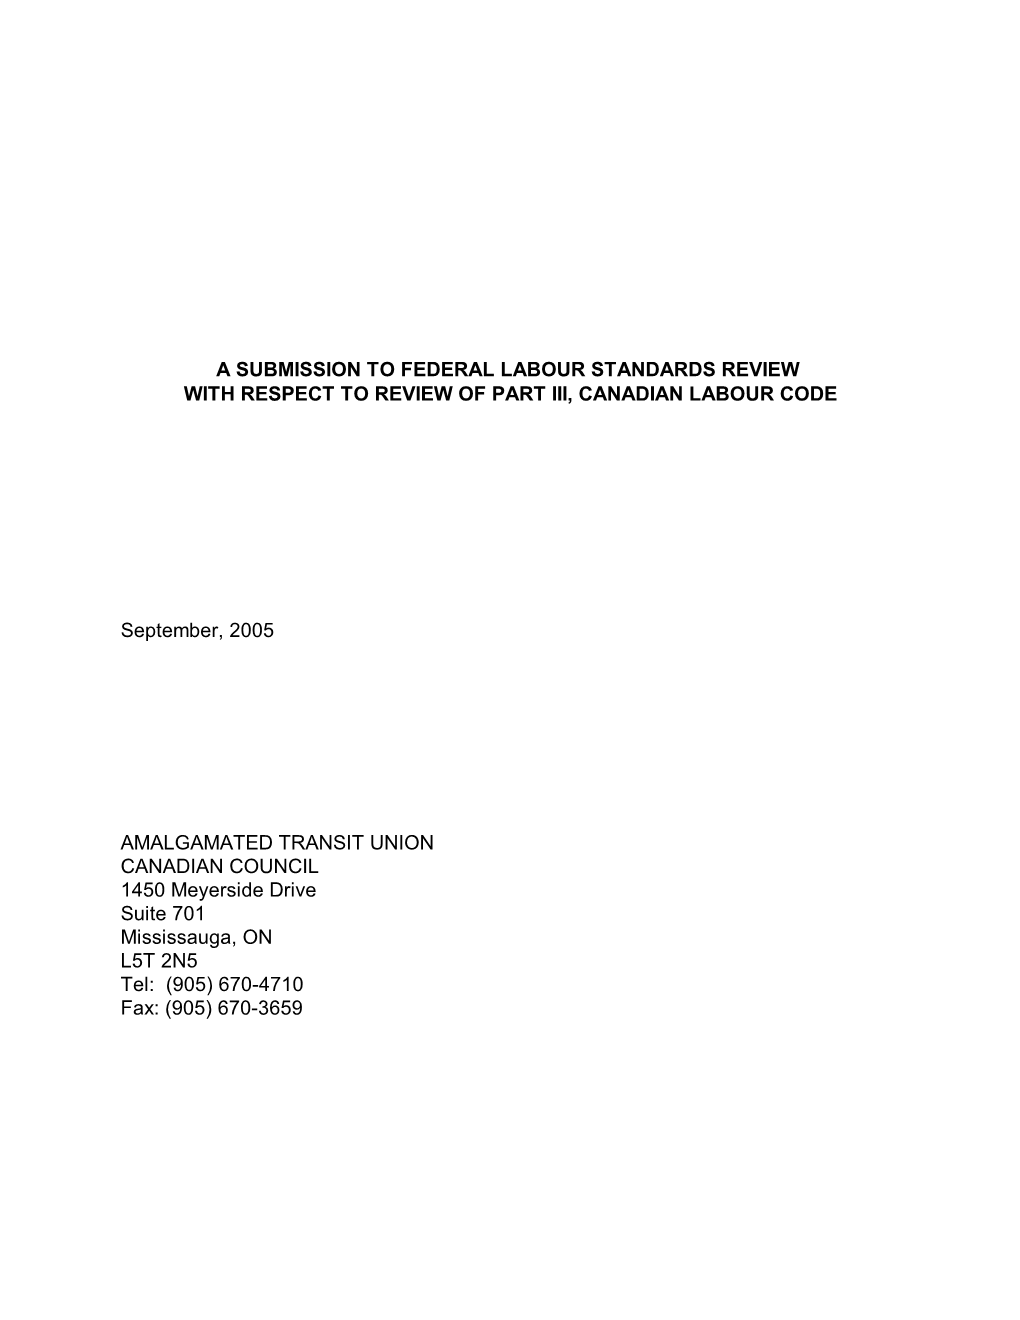 A Submission to Federal Labour Standards Review with Respect to Review of Part Iii, Canadian Labour Code